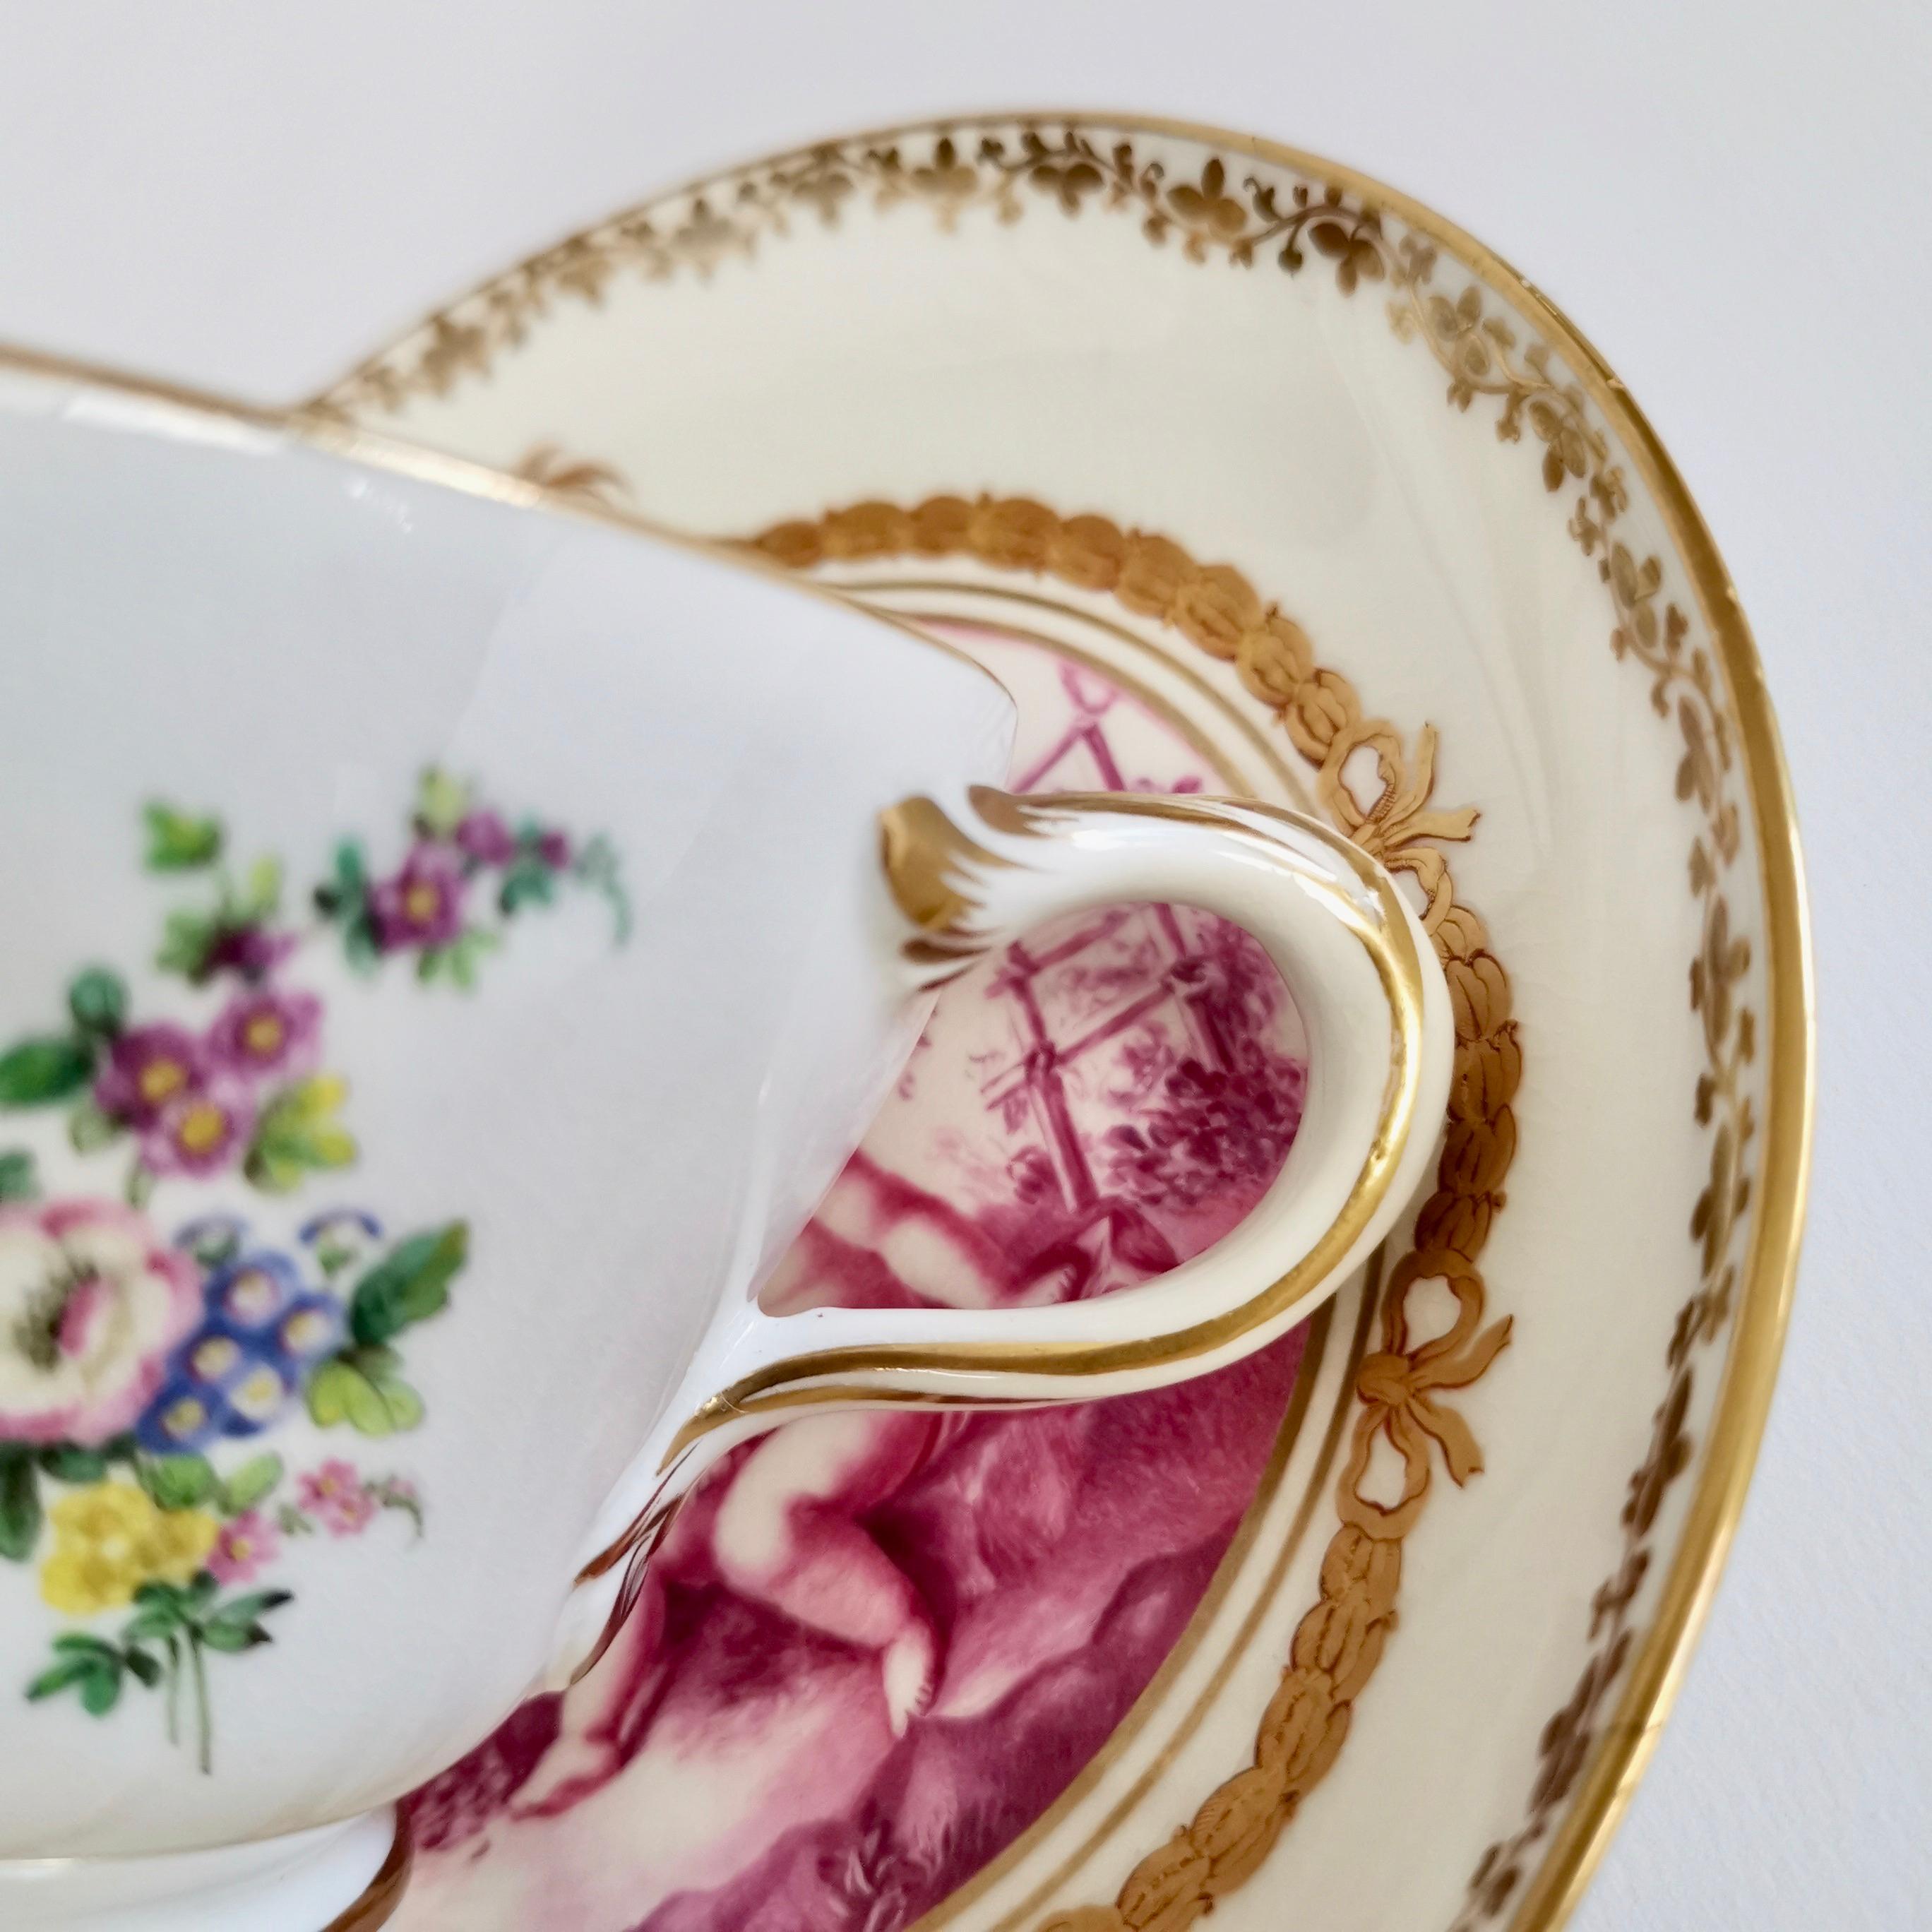 Kerr & Binns Worcester Porcelain Cup and Saucer, Puce Putti Playing, circa 1855 3